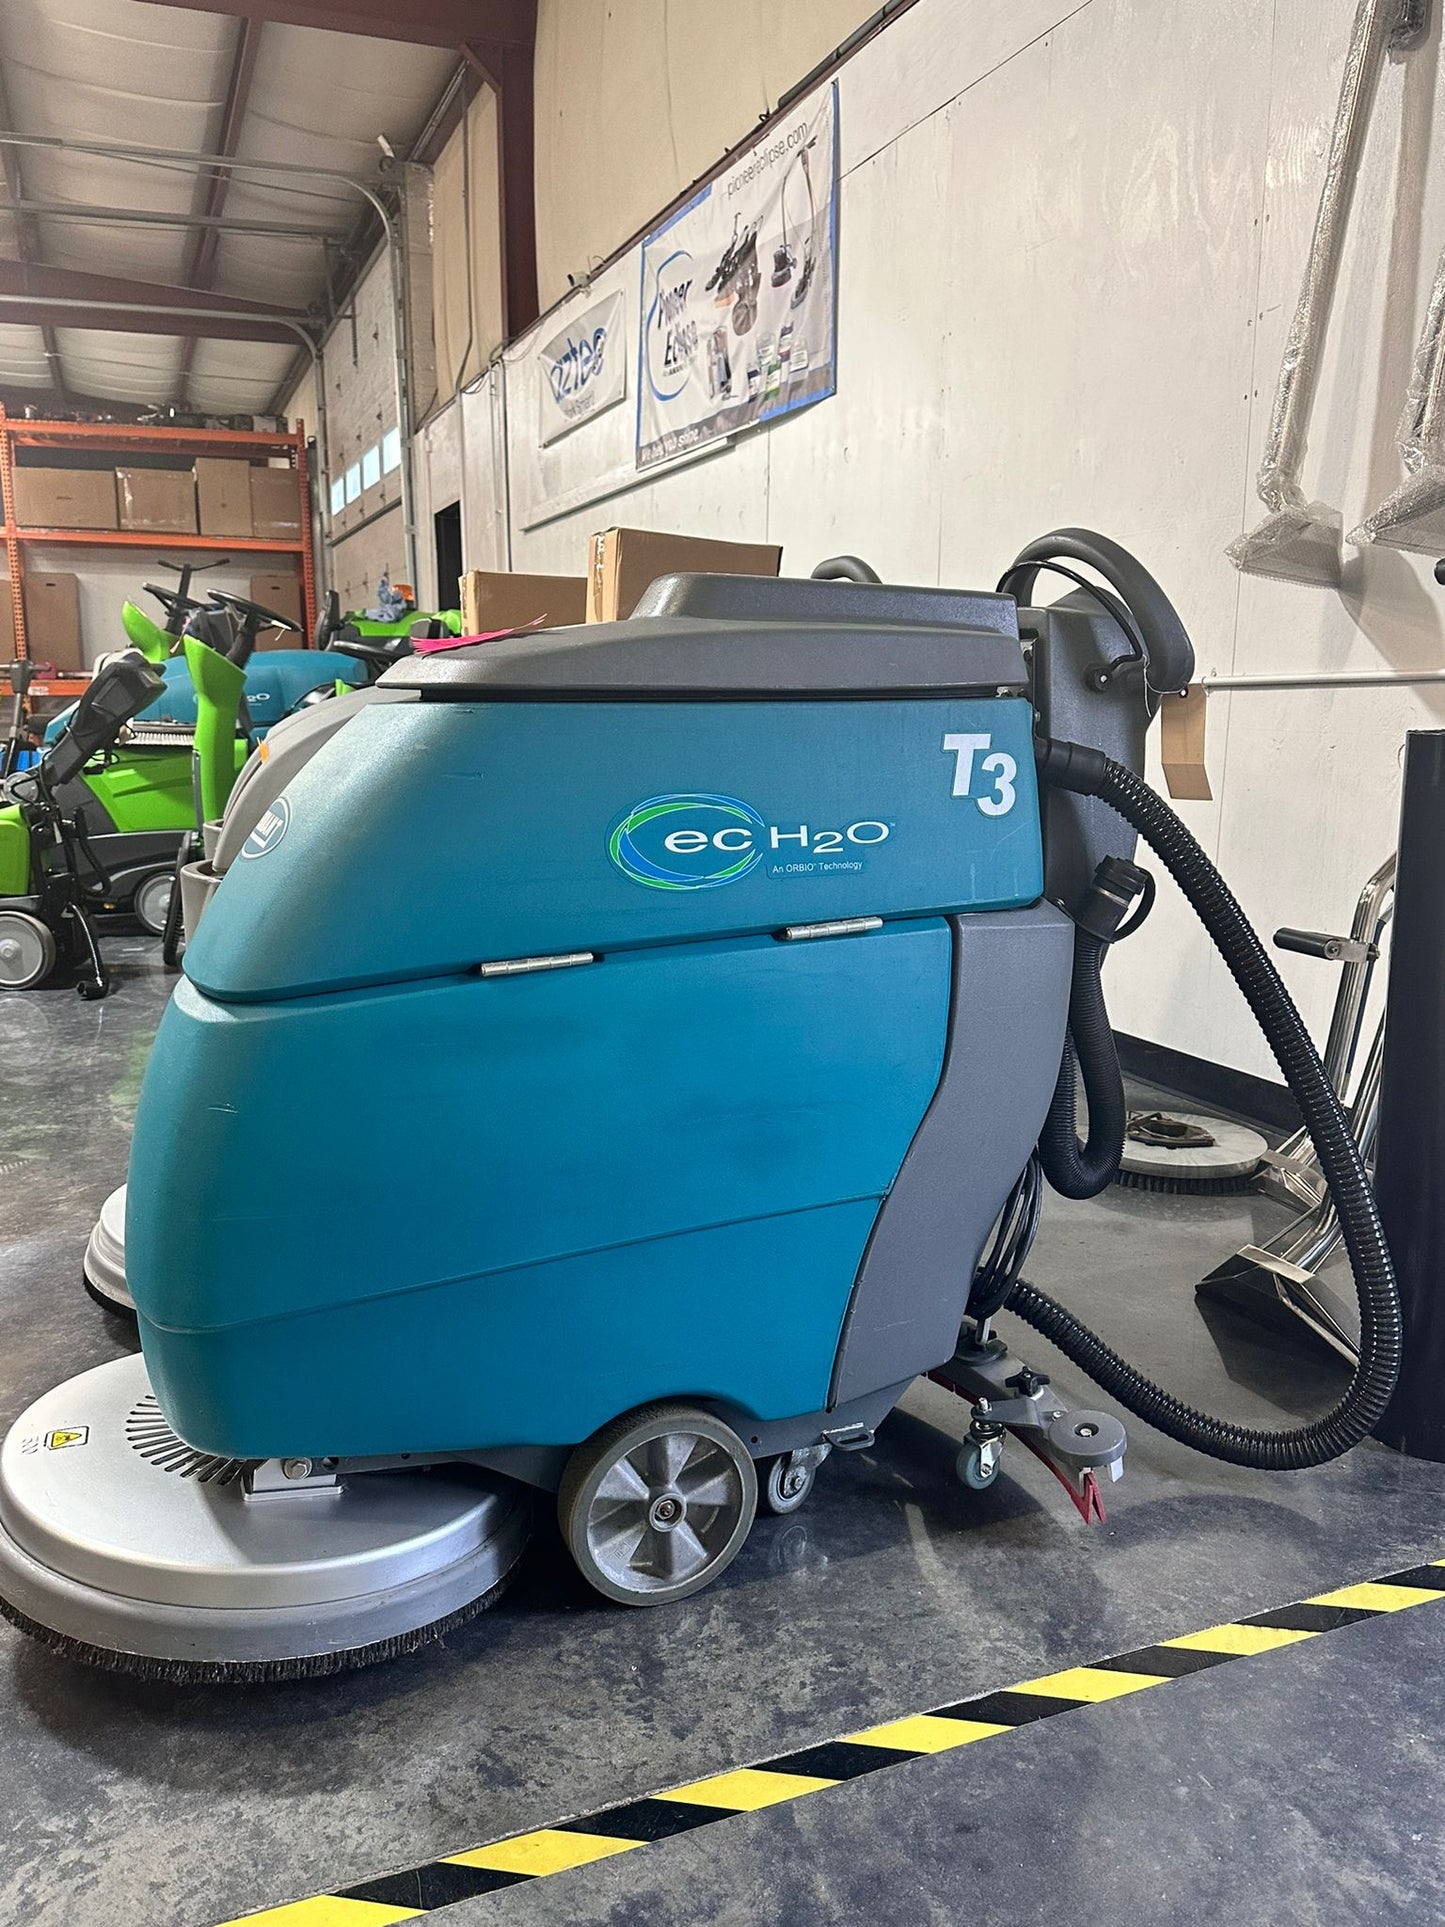 Tennant 3 ECO H20 Scrubber - 20", Pad Assist (REFURBISHED)